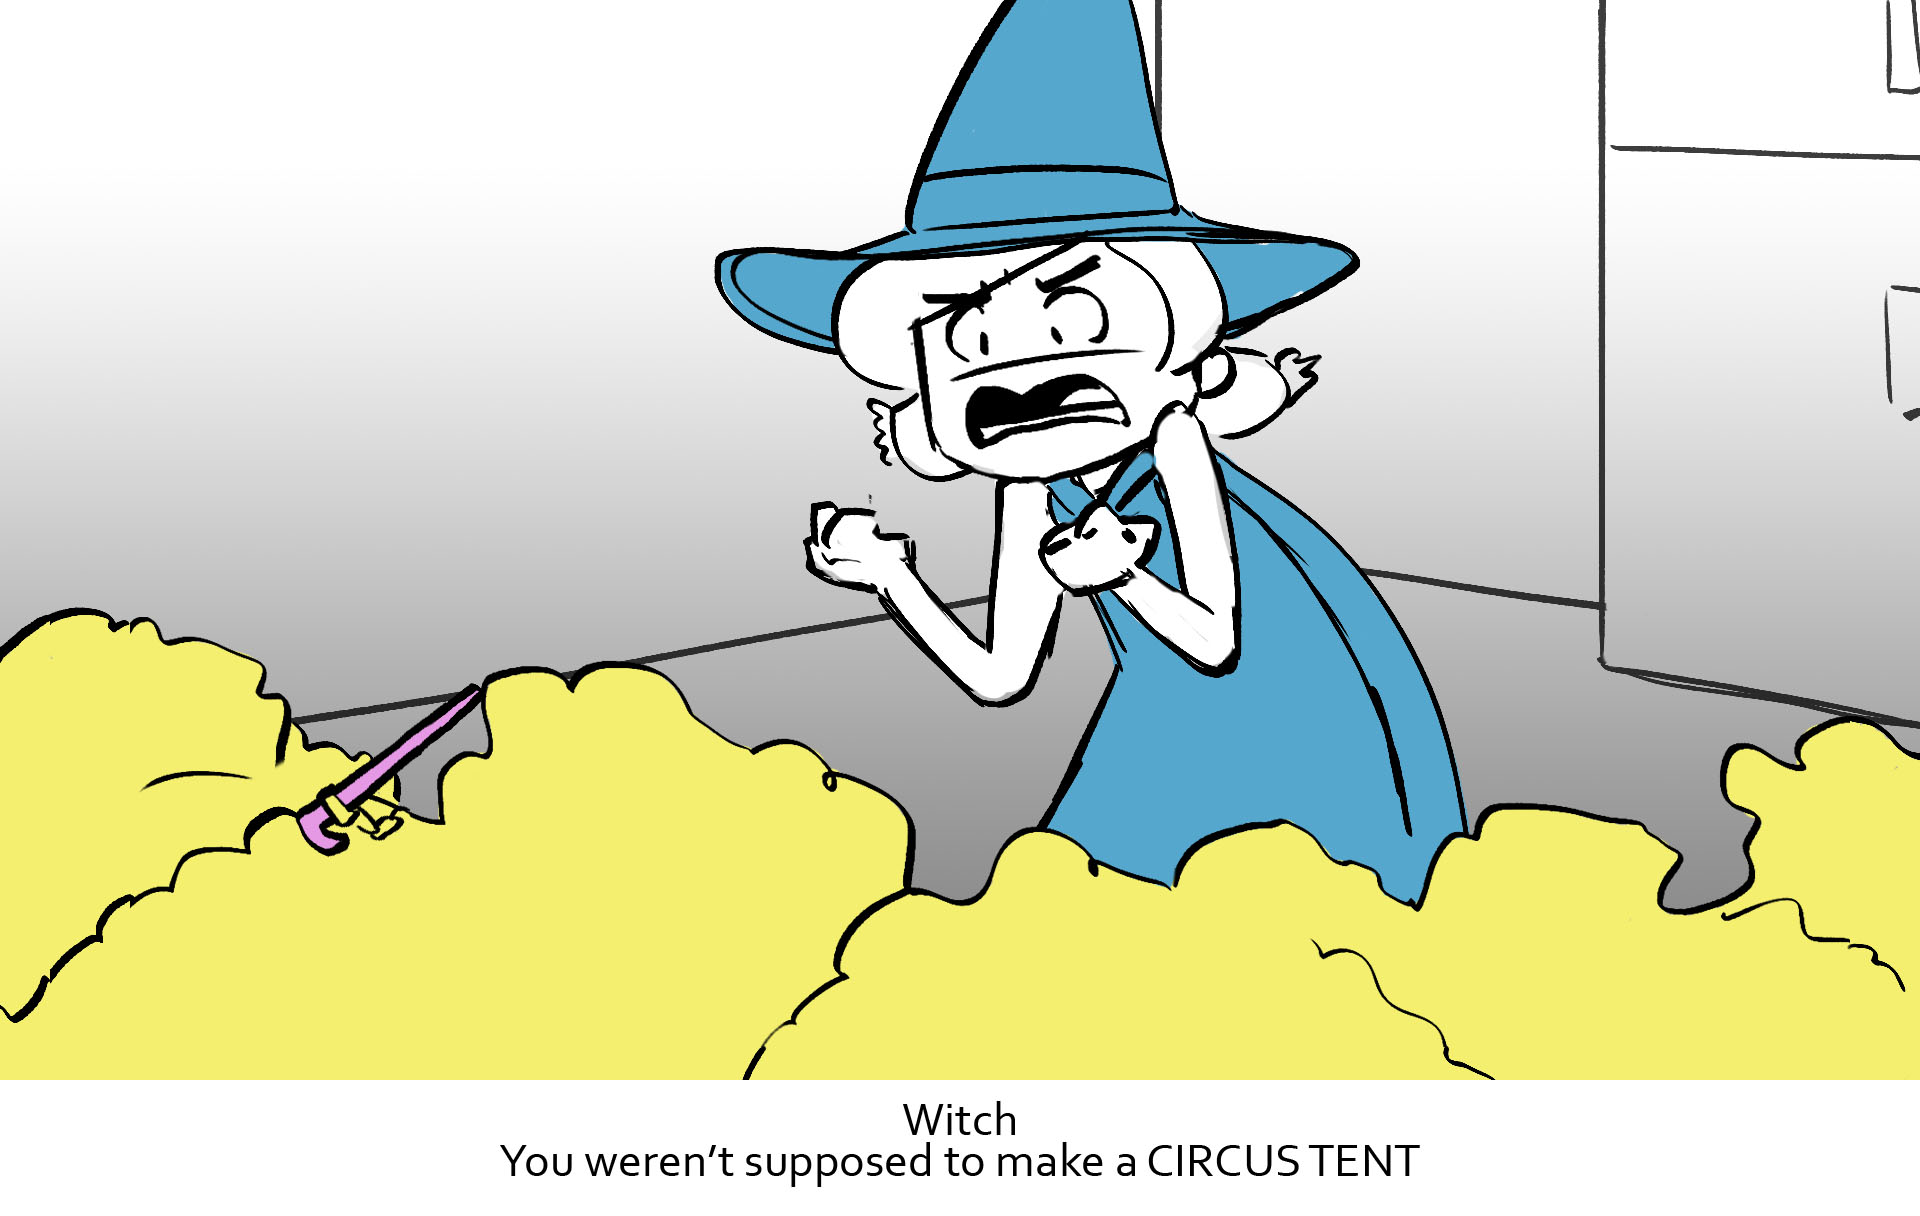 CrochetWitch_wDialogue_0052_Witch You weren’t supposed to make a CIRCUS TENT.jpg